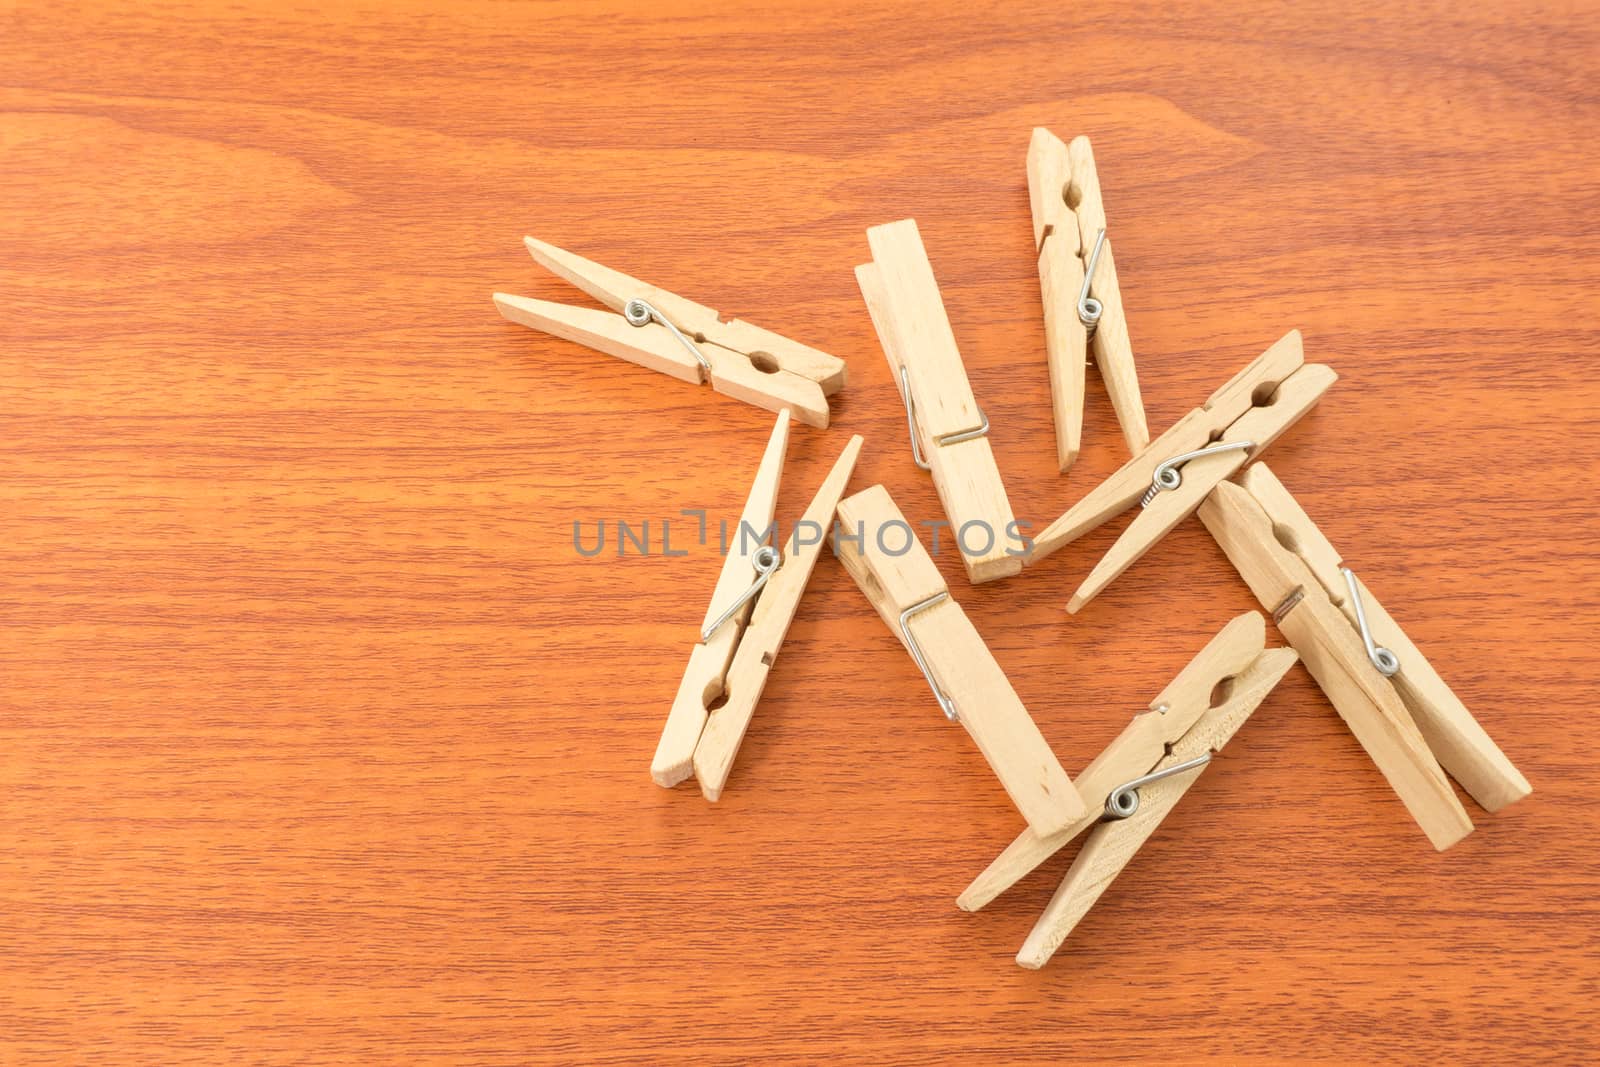 Mix Wood Clothespins on Red Wood Surface